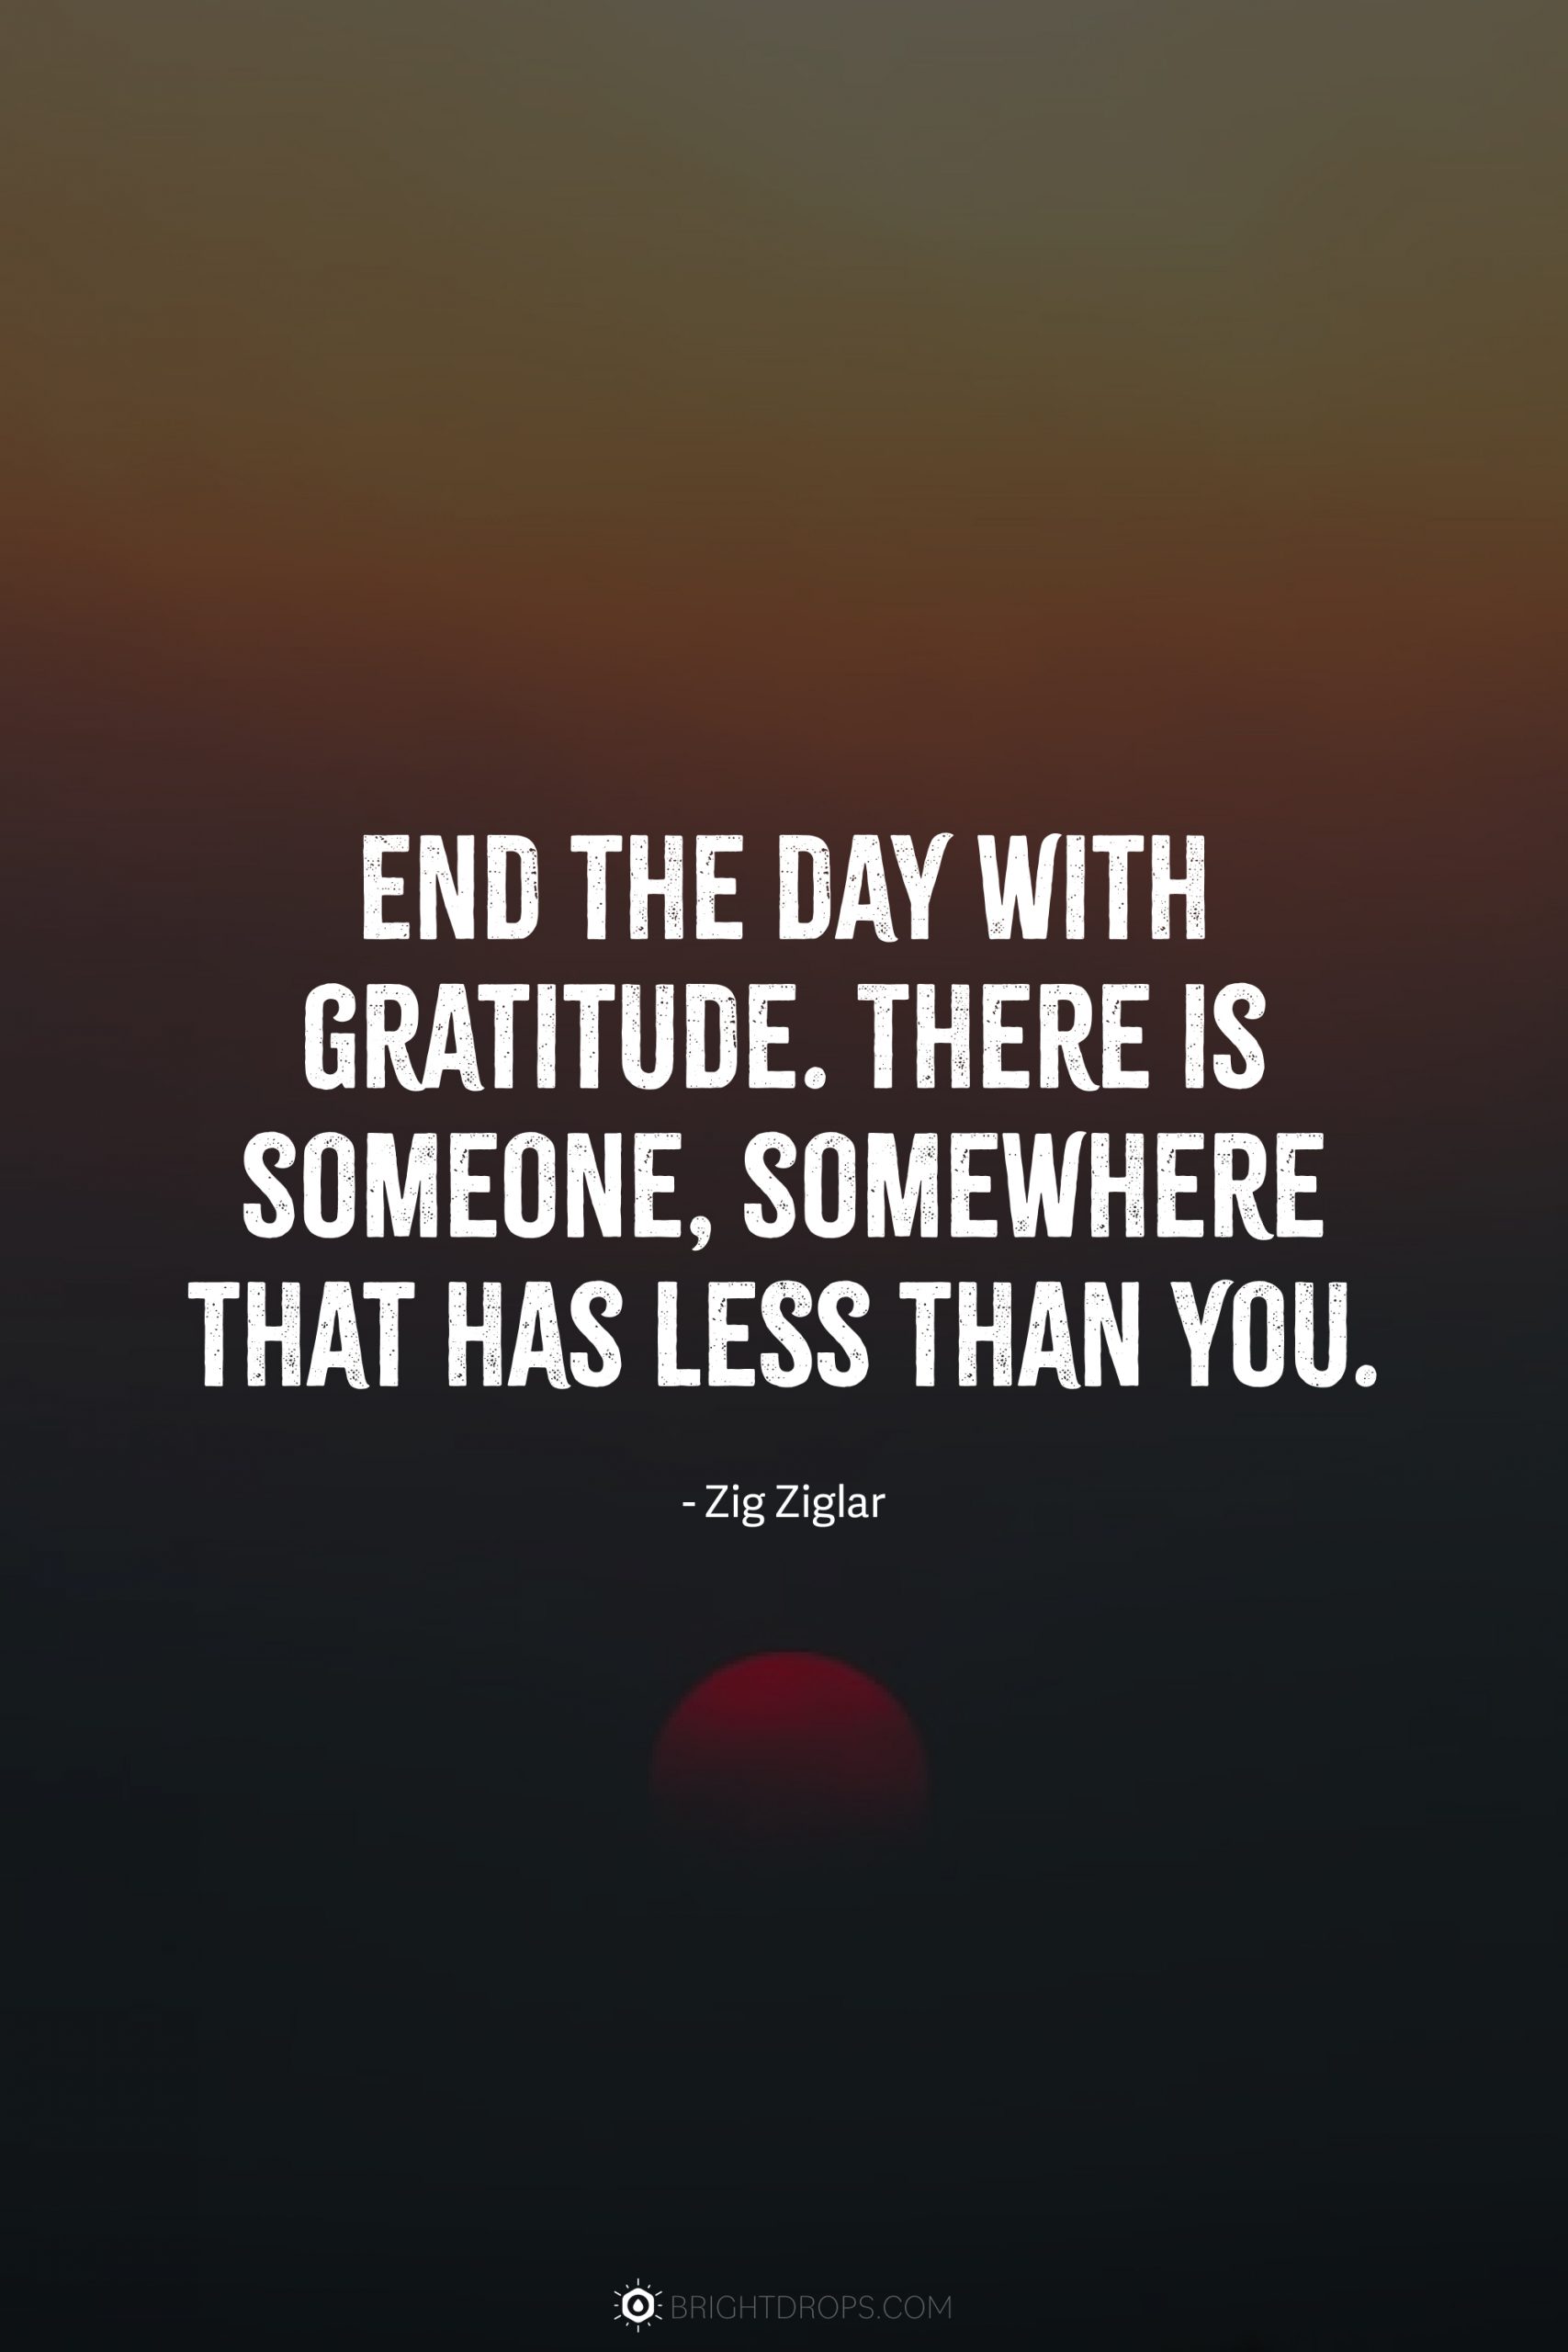 End the day with gratitude. There is someone, somewhere that has less than you.